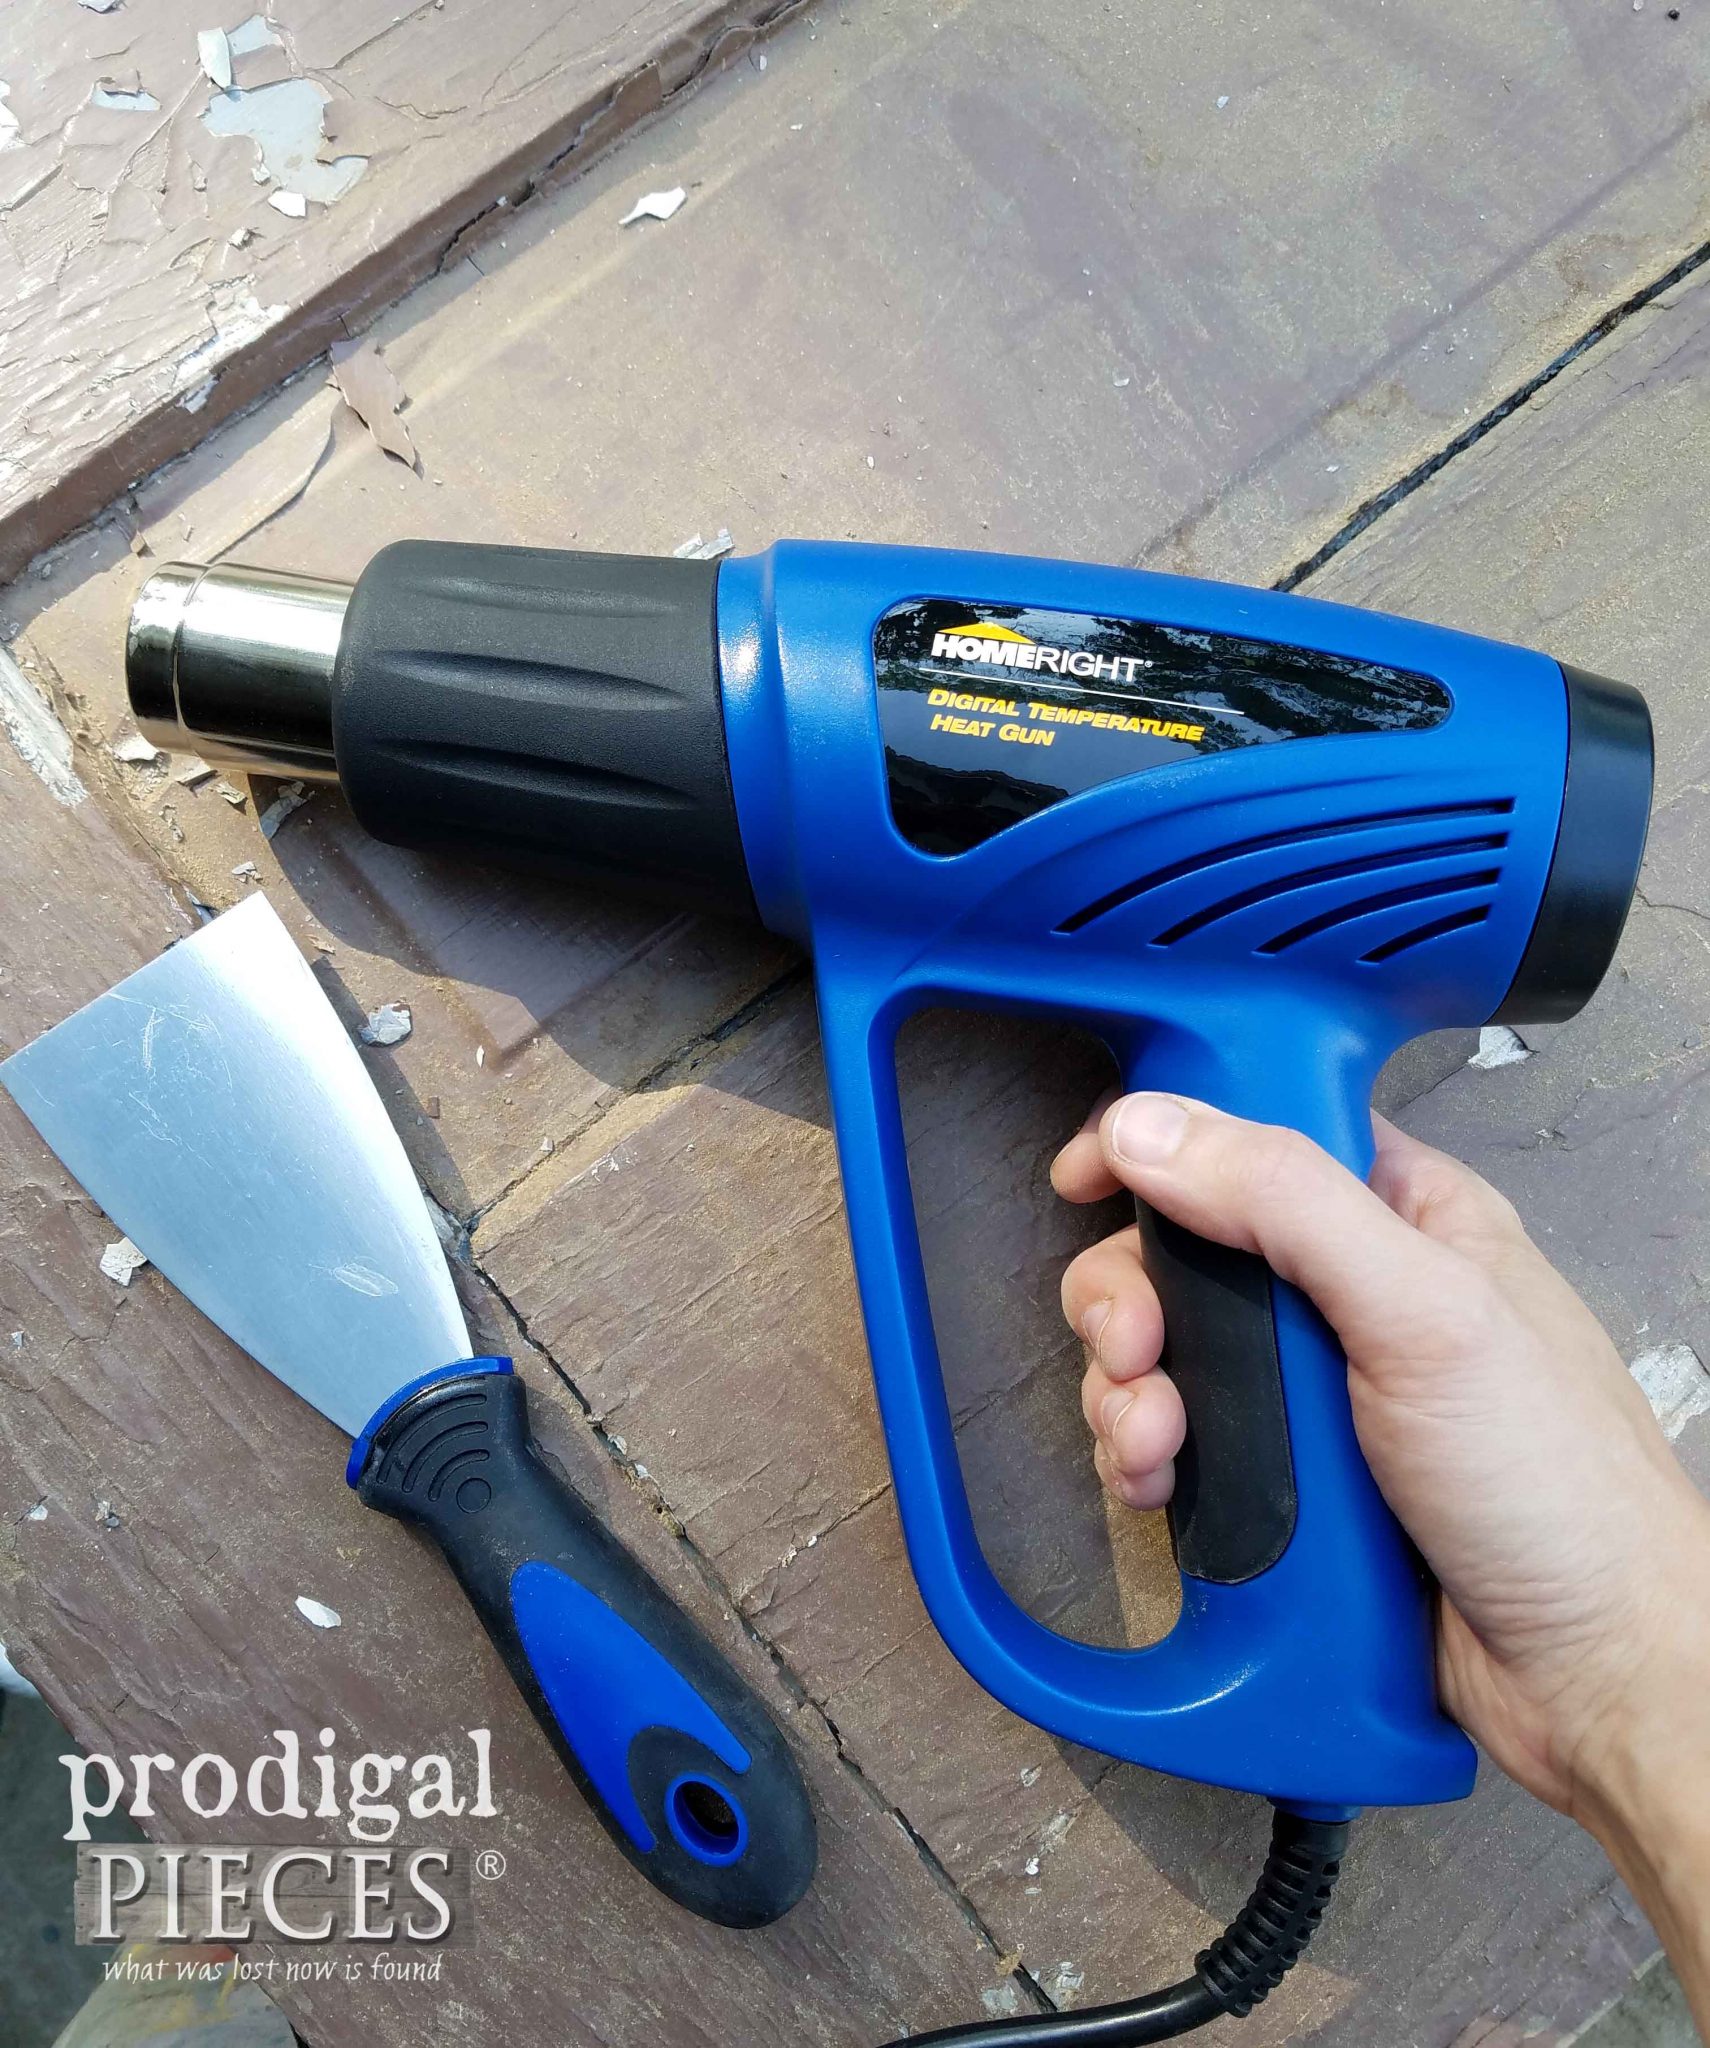 HomeRight Heat Gun to Remove Layers of Paint | prodigalpieces.com